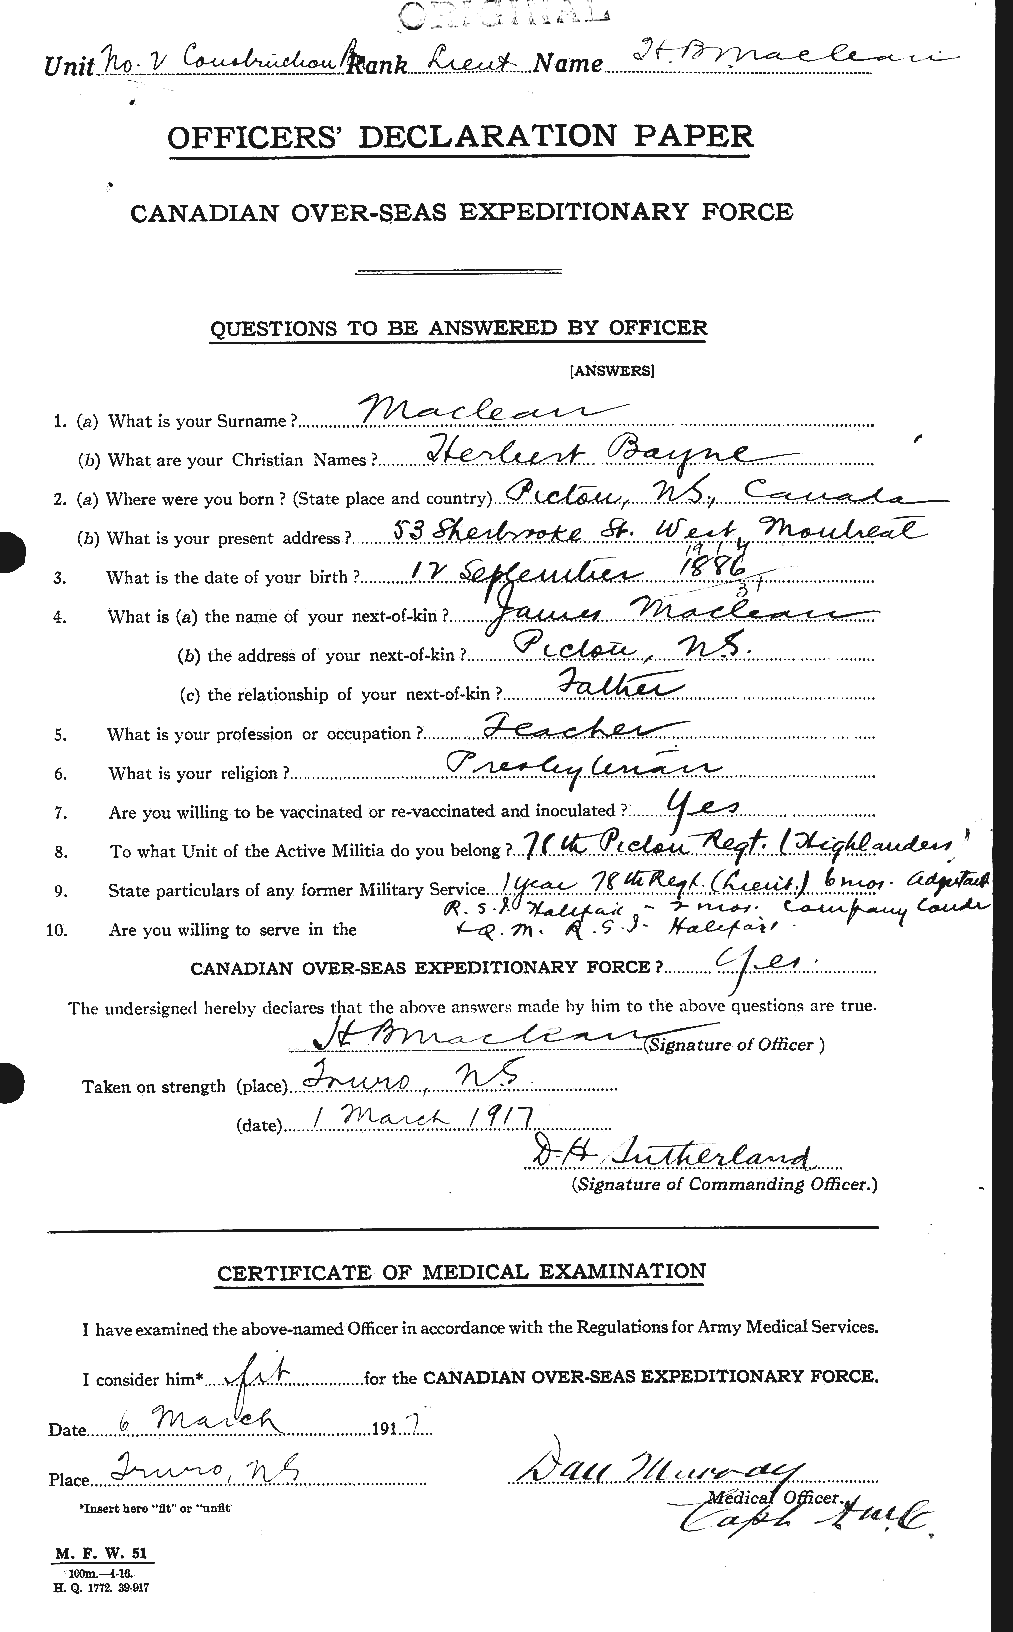 Personnel Records of the First World War - CEF 540378a